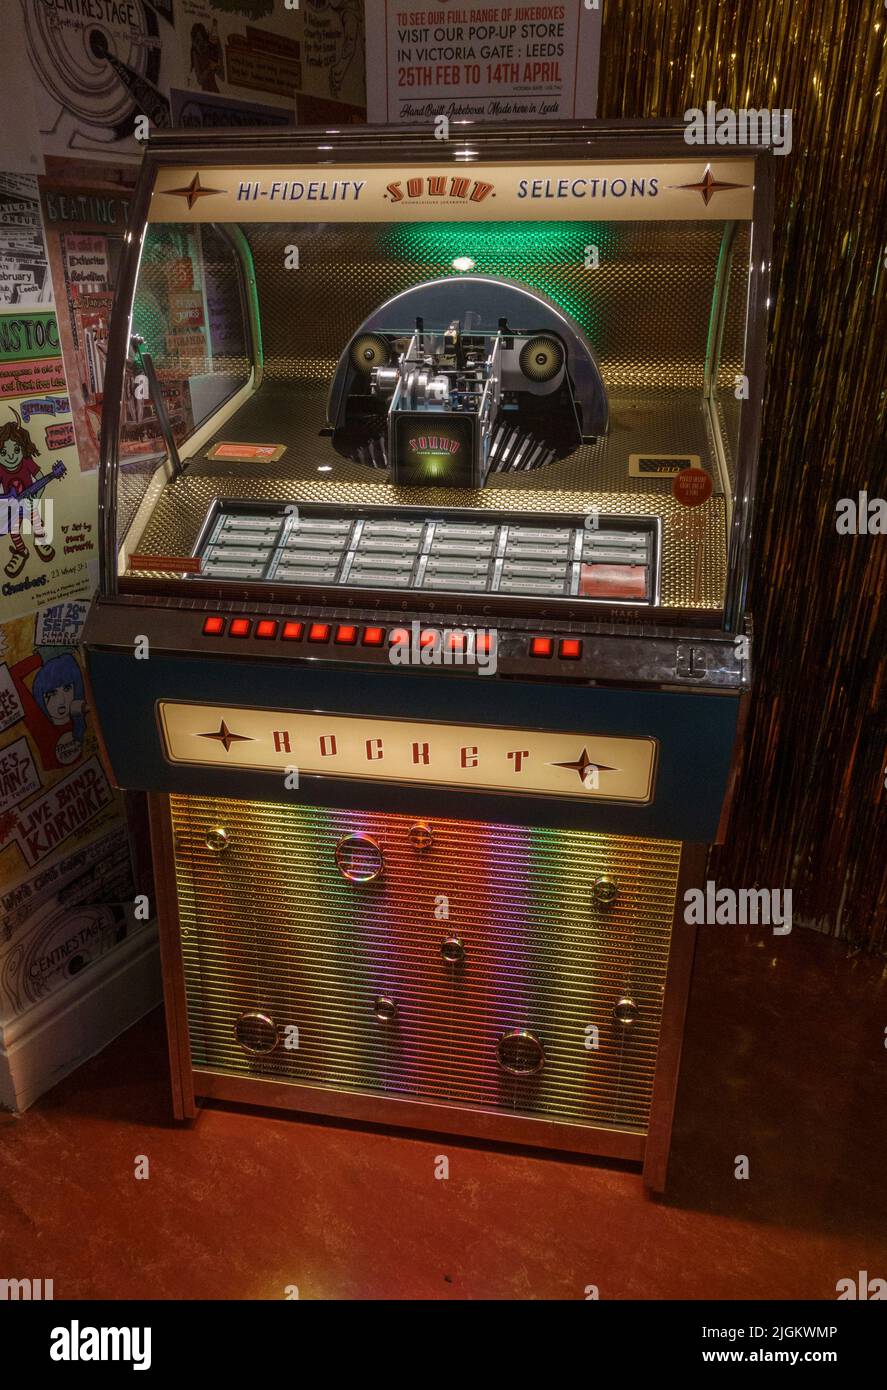 A Rocket Hi-Fidelity Sound Leisure 1950s retro jukebox on display in a museum in the UK. Stock Photo